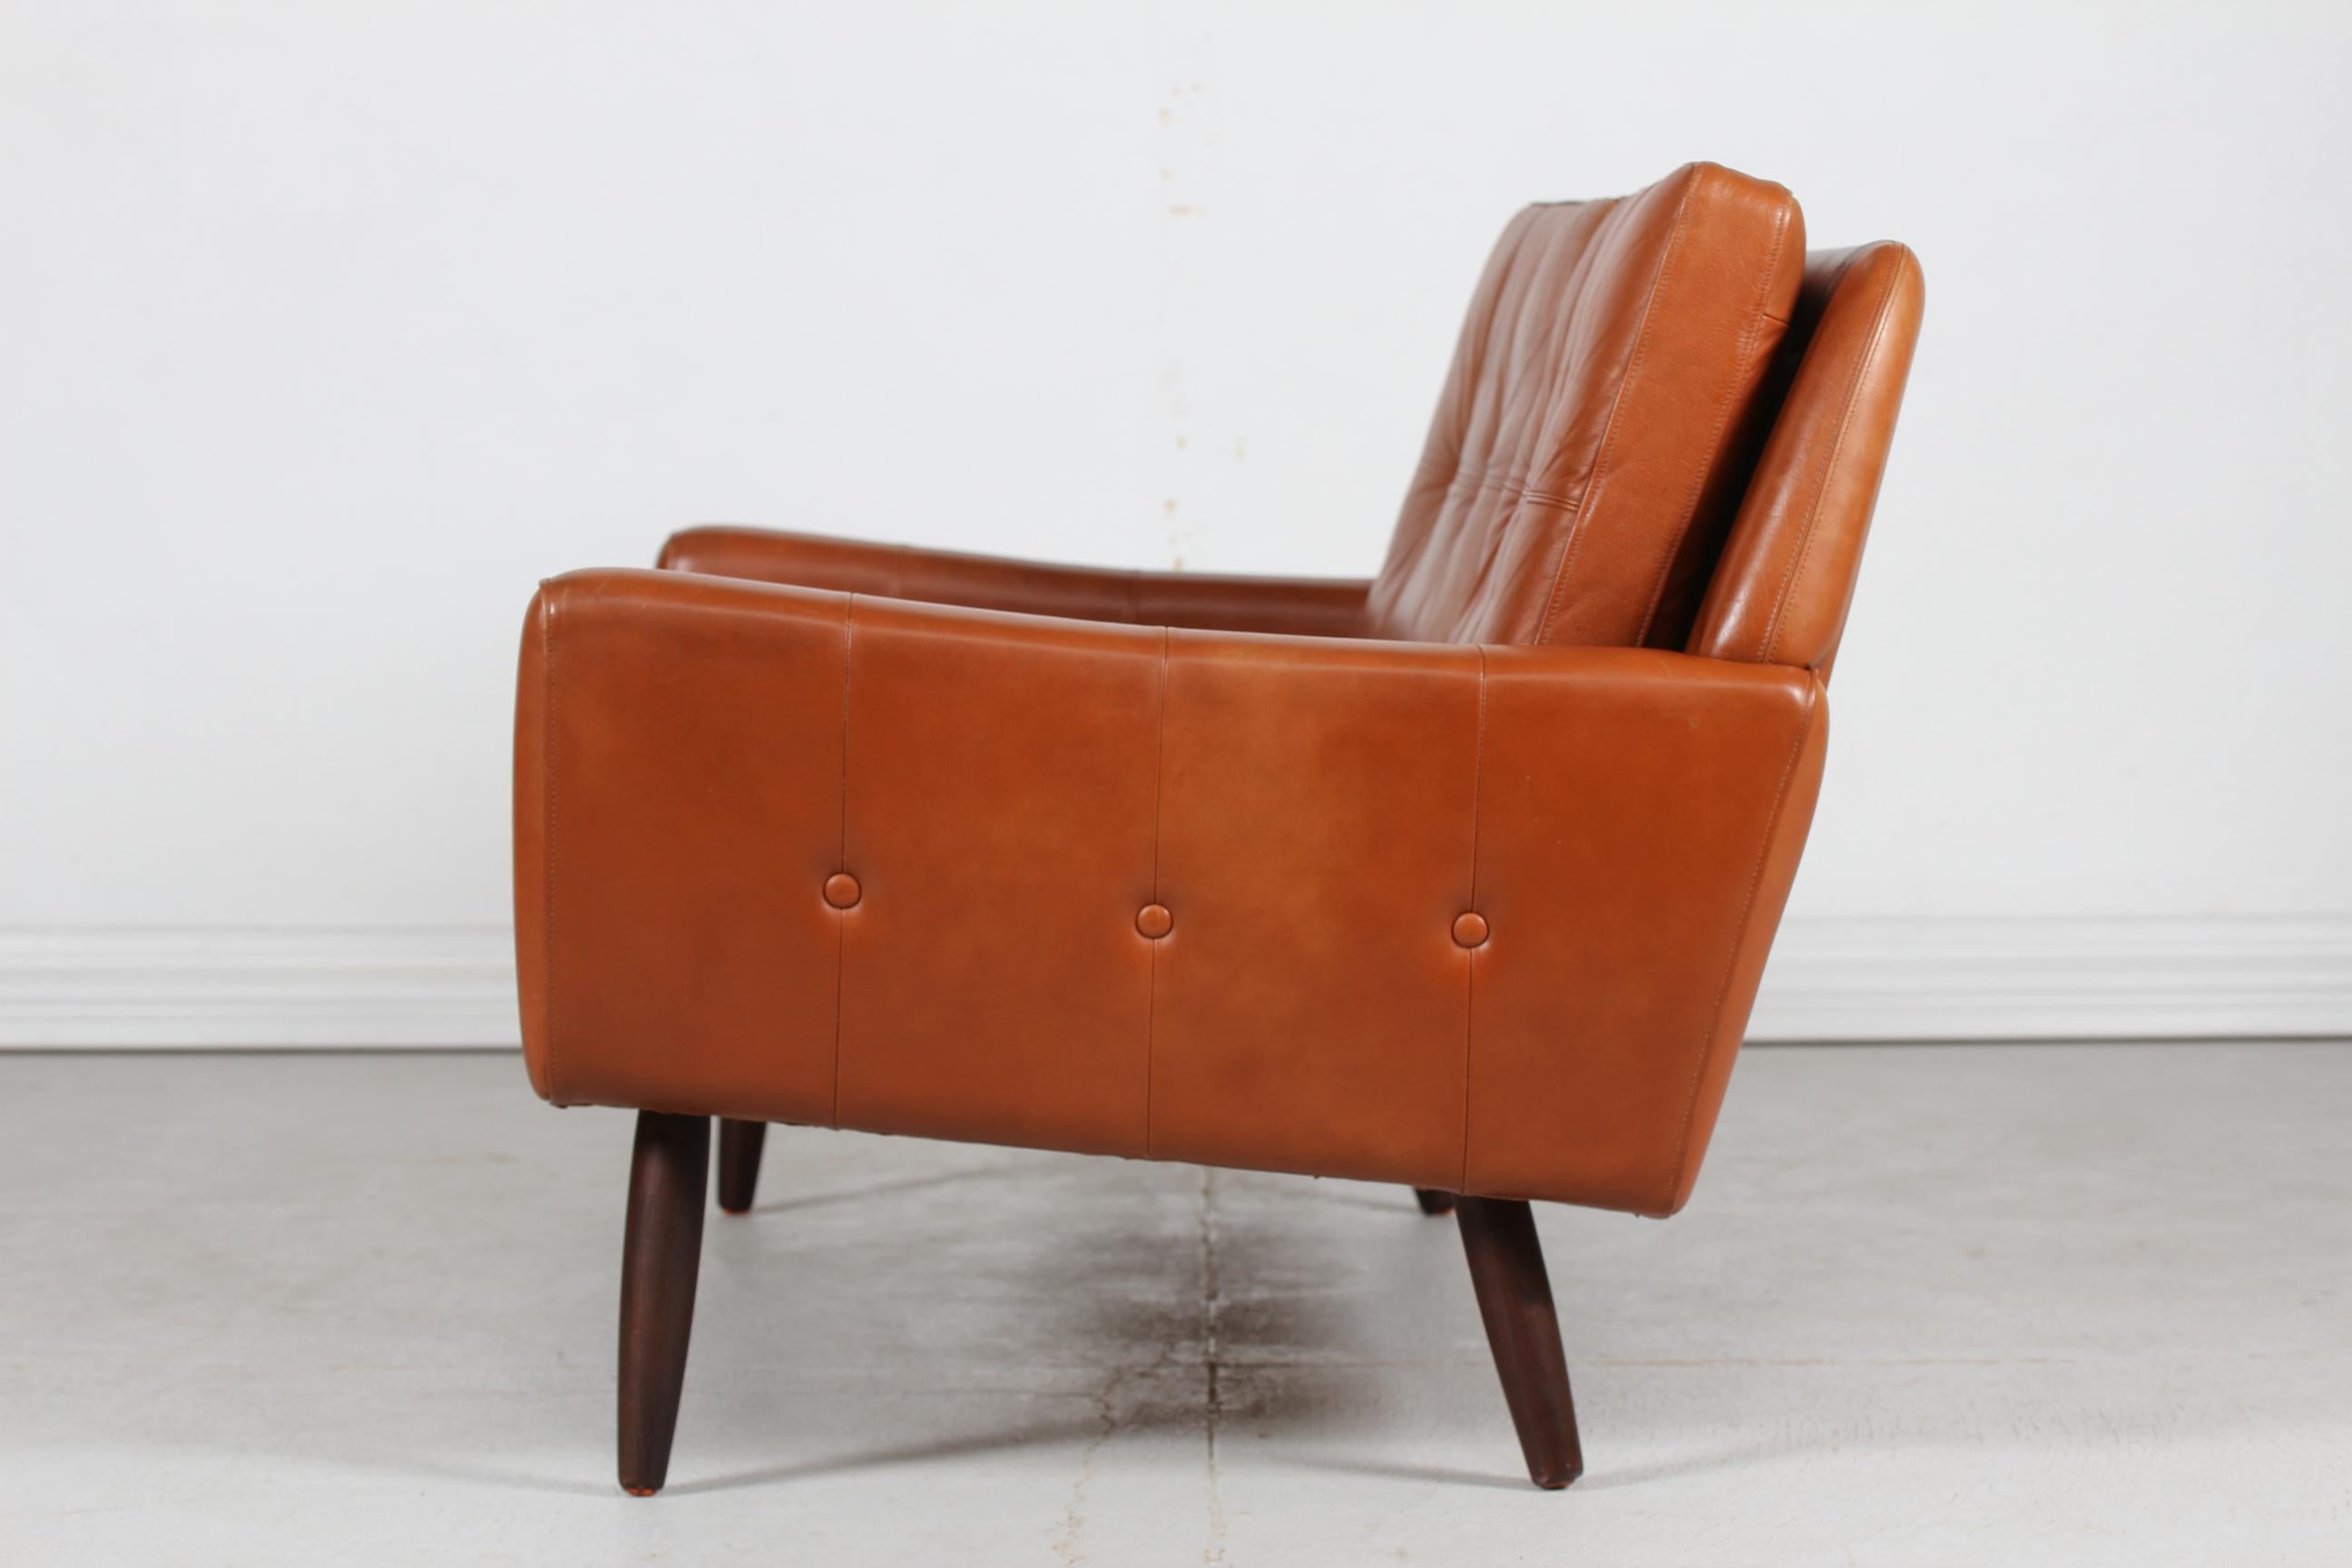 Danish Modern Two-Seat Sofa with Cognac-Colored Leather Made in Denmark 1960s For Sale 1